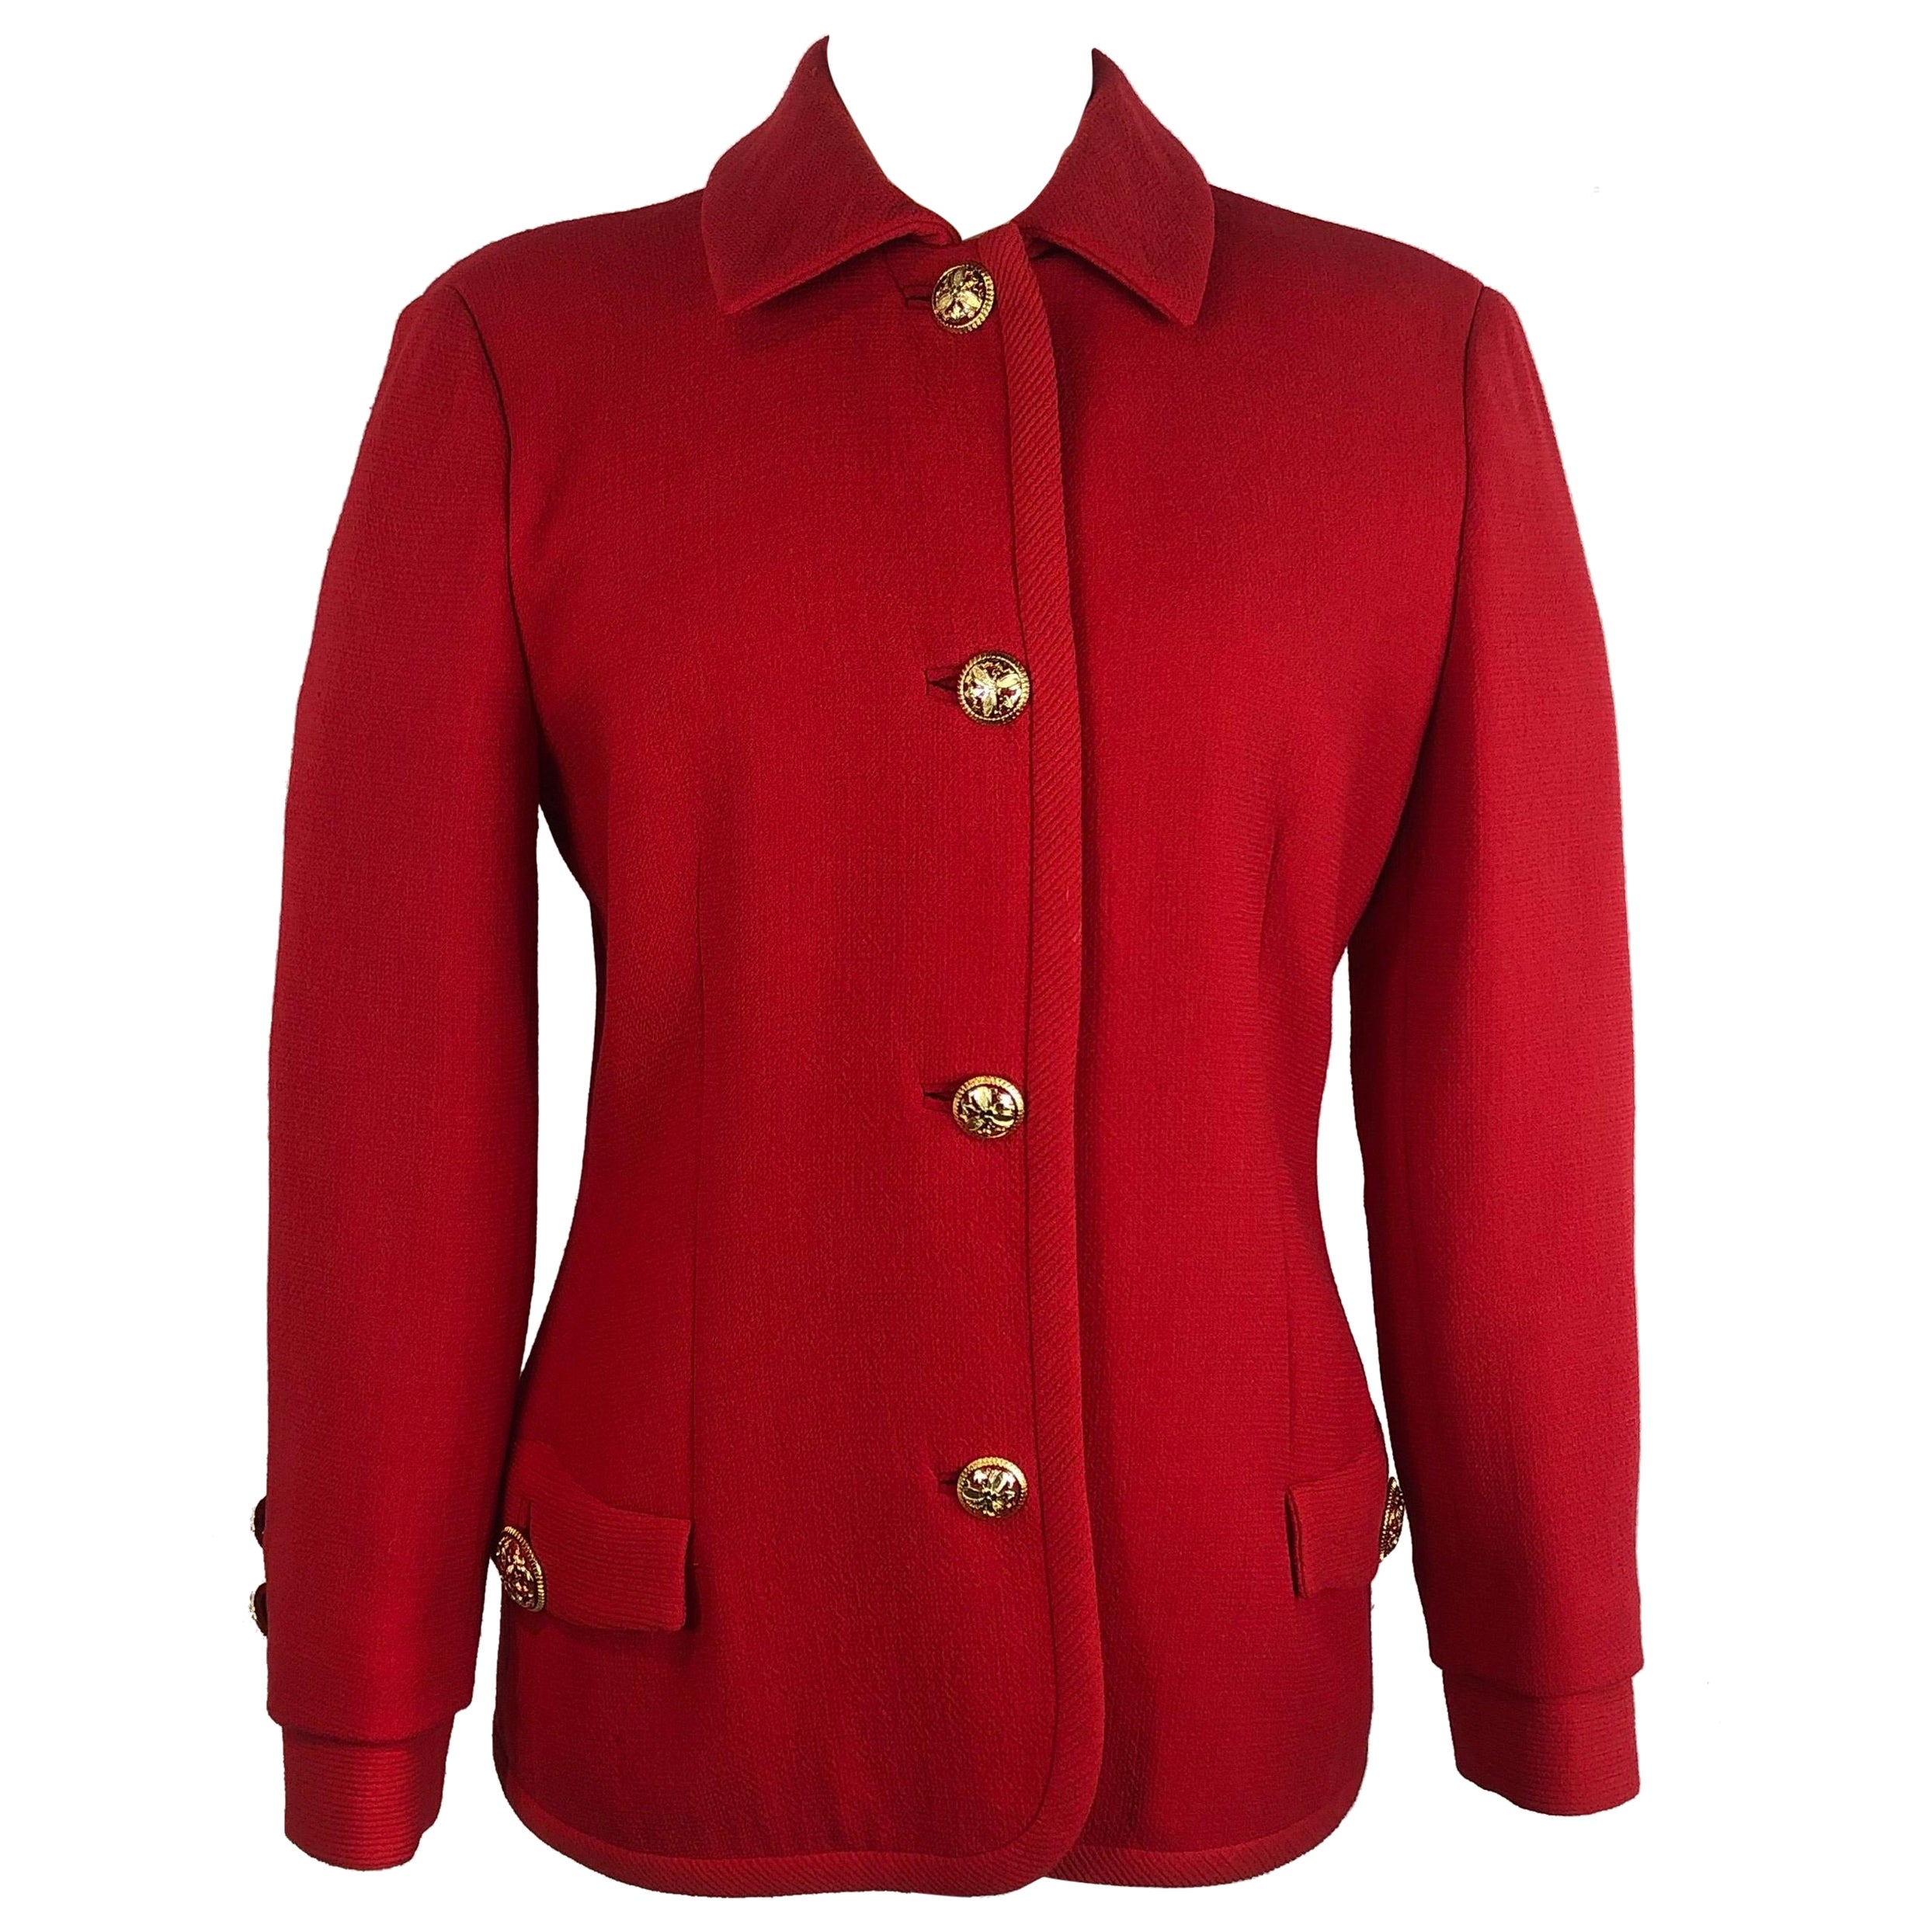 Gianni Versace 80s red wool jacket For Sale